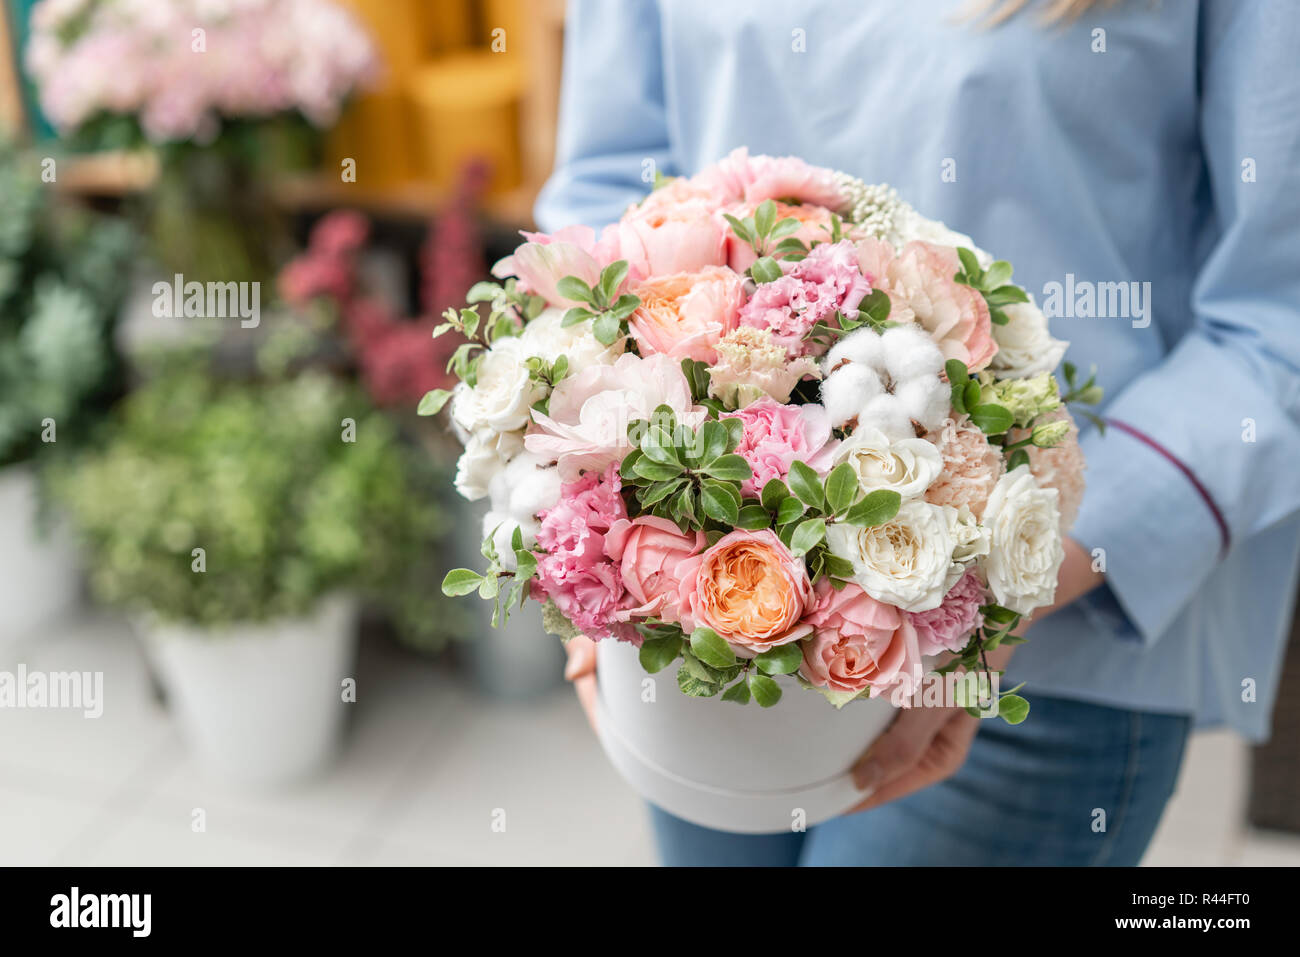 floral bunch in head box. European floral shop. Bouquet of beautiful Mixed flowers in woman hand. Excellent garden flowers in the arrangement , the work of a professional florist. Stock Photo